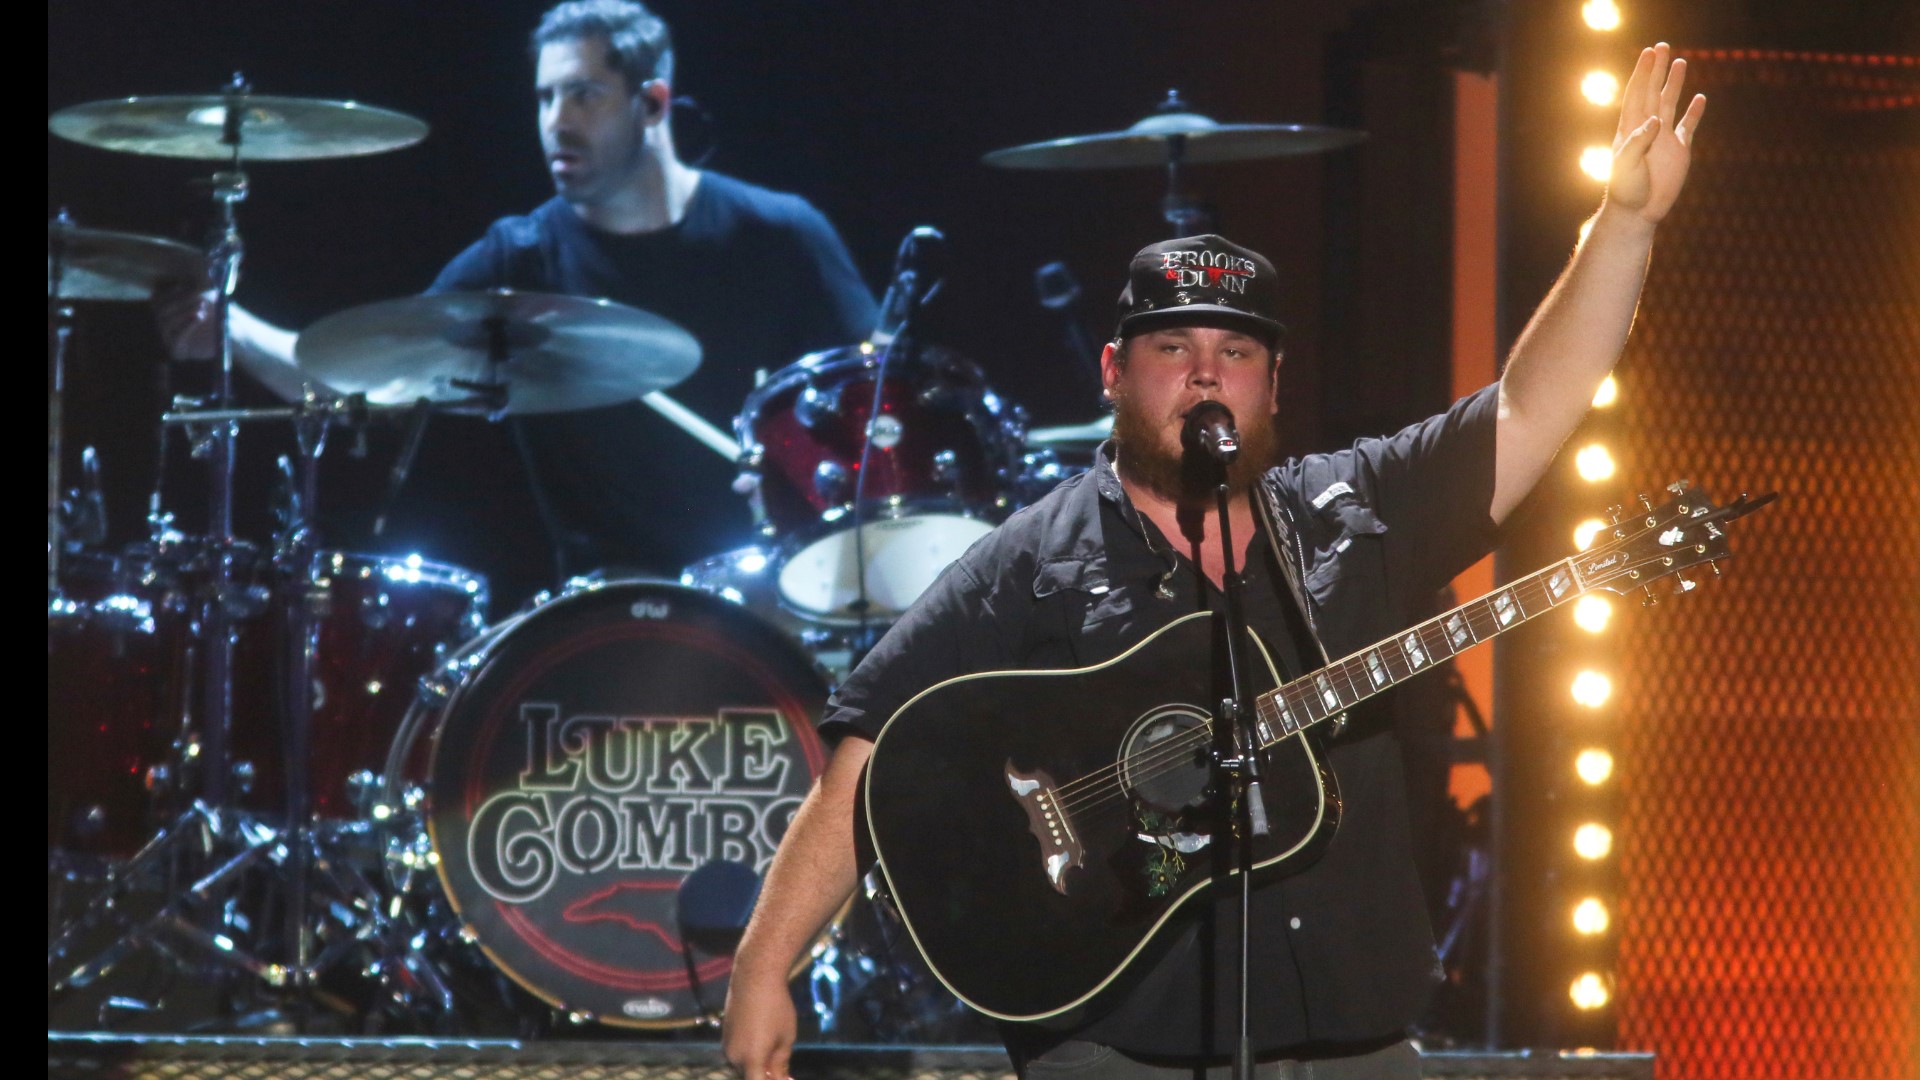 Luke Combs is going on tour and heading to Atlanta